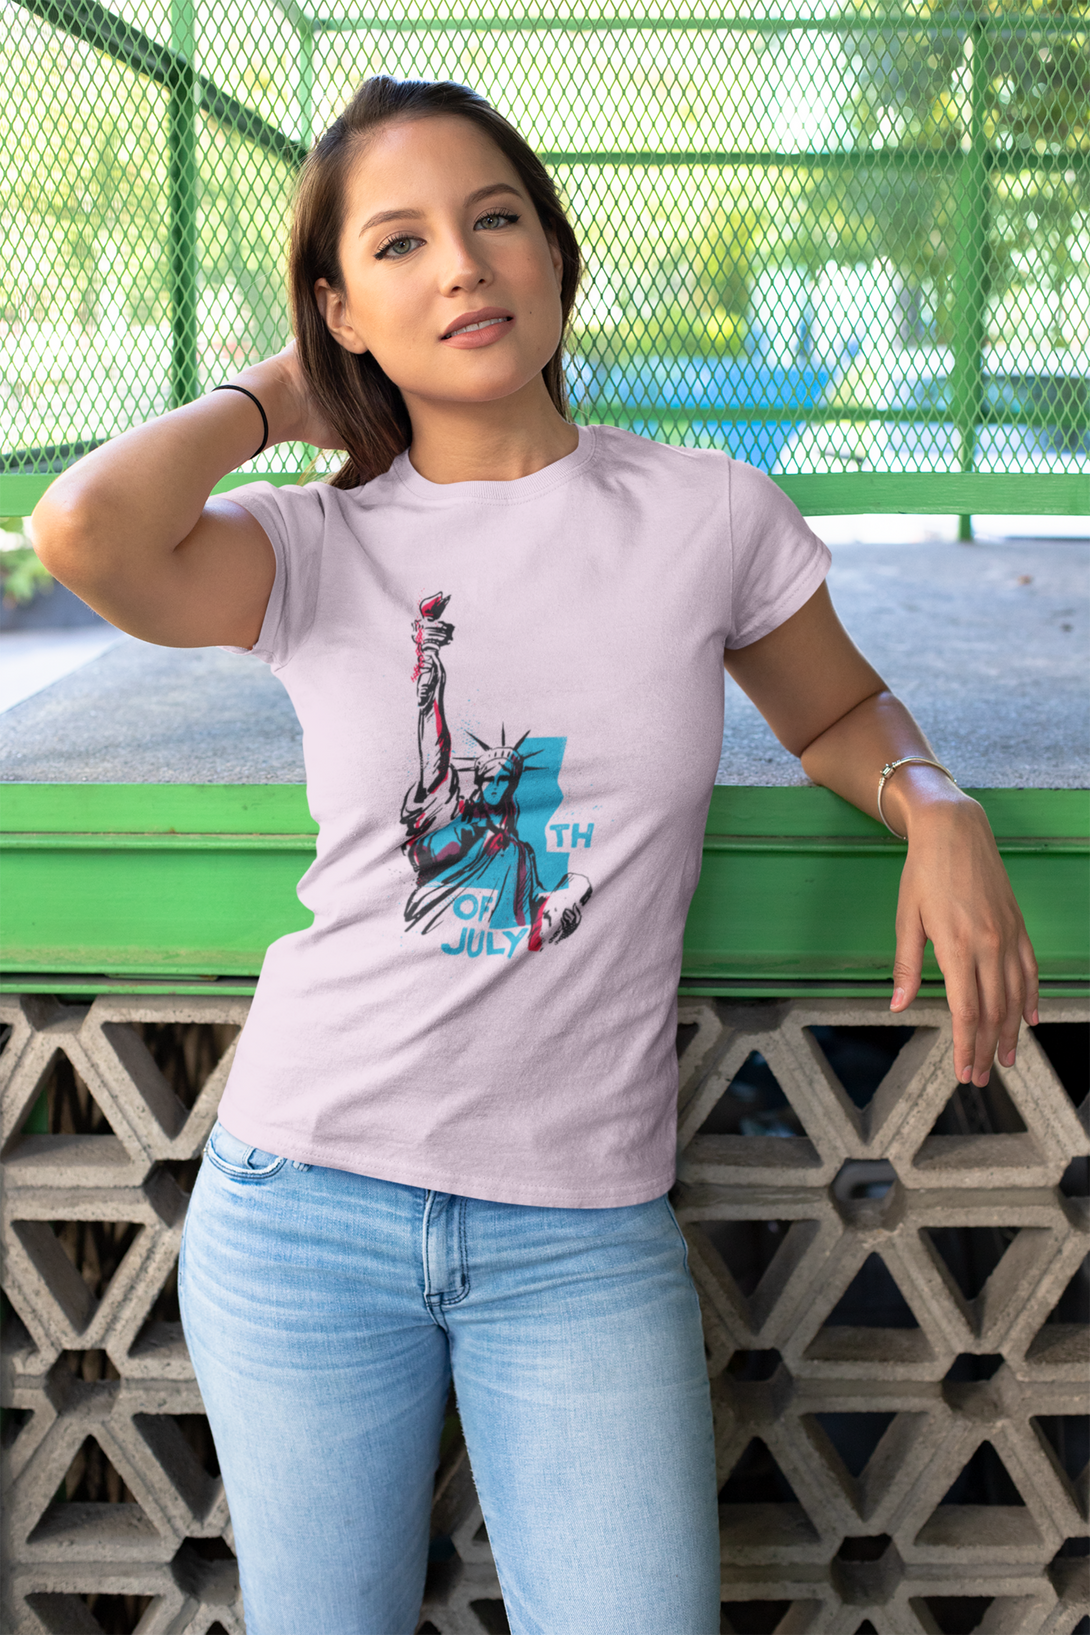 Statue Of Liberty Vintage Printed T-Shirt For Women - WowWaves - 5